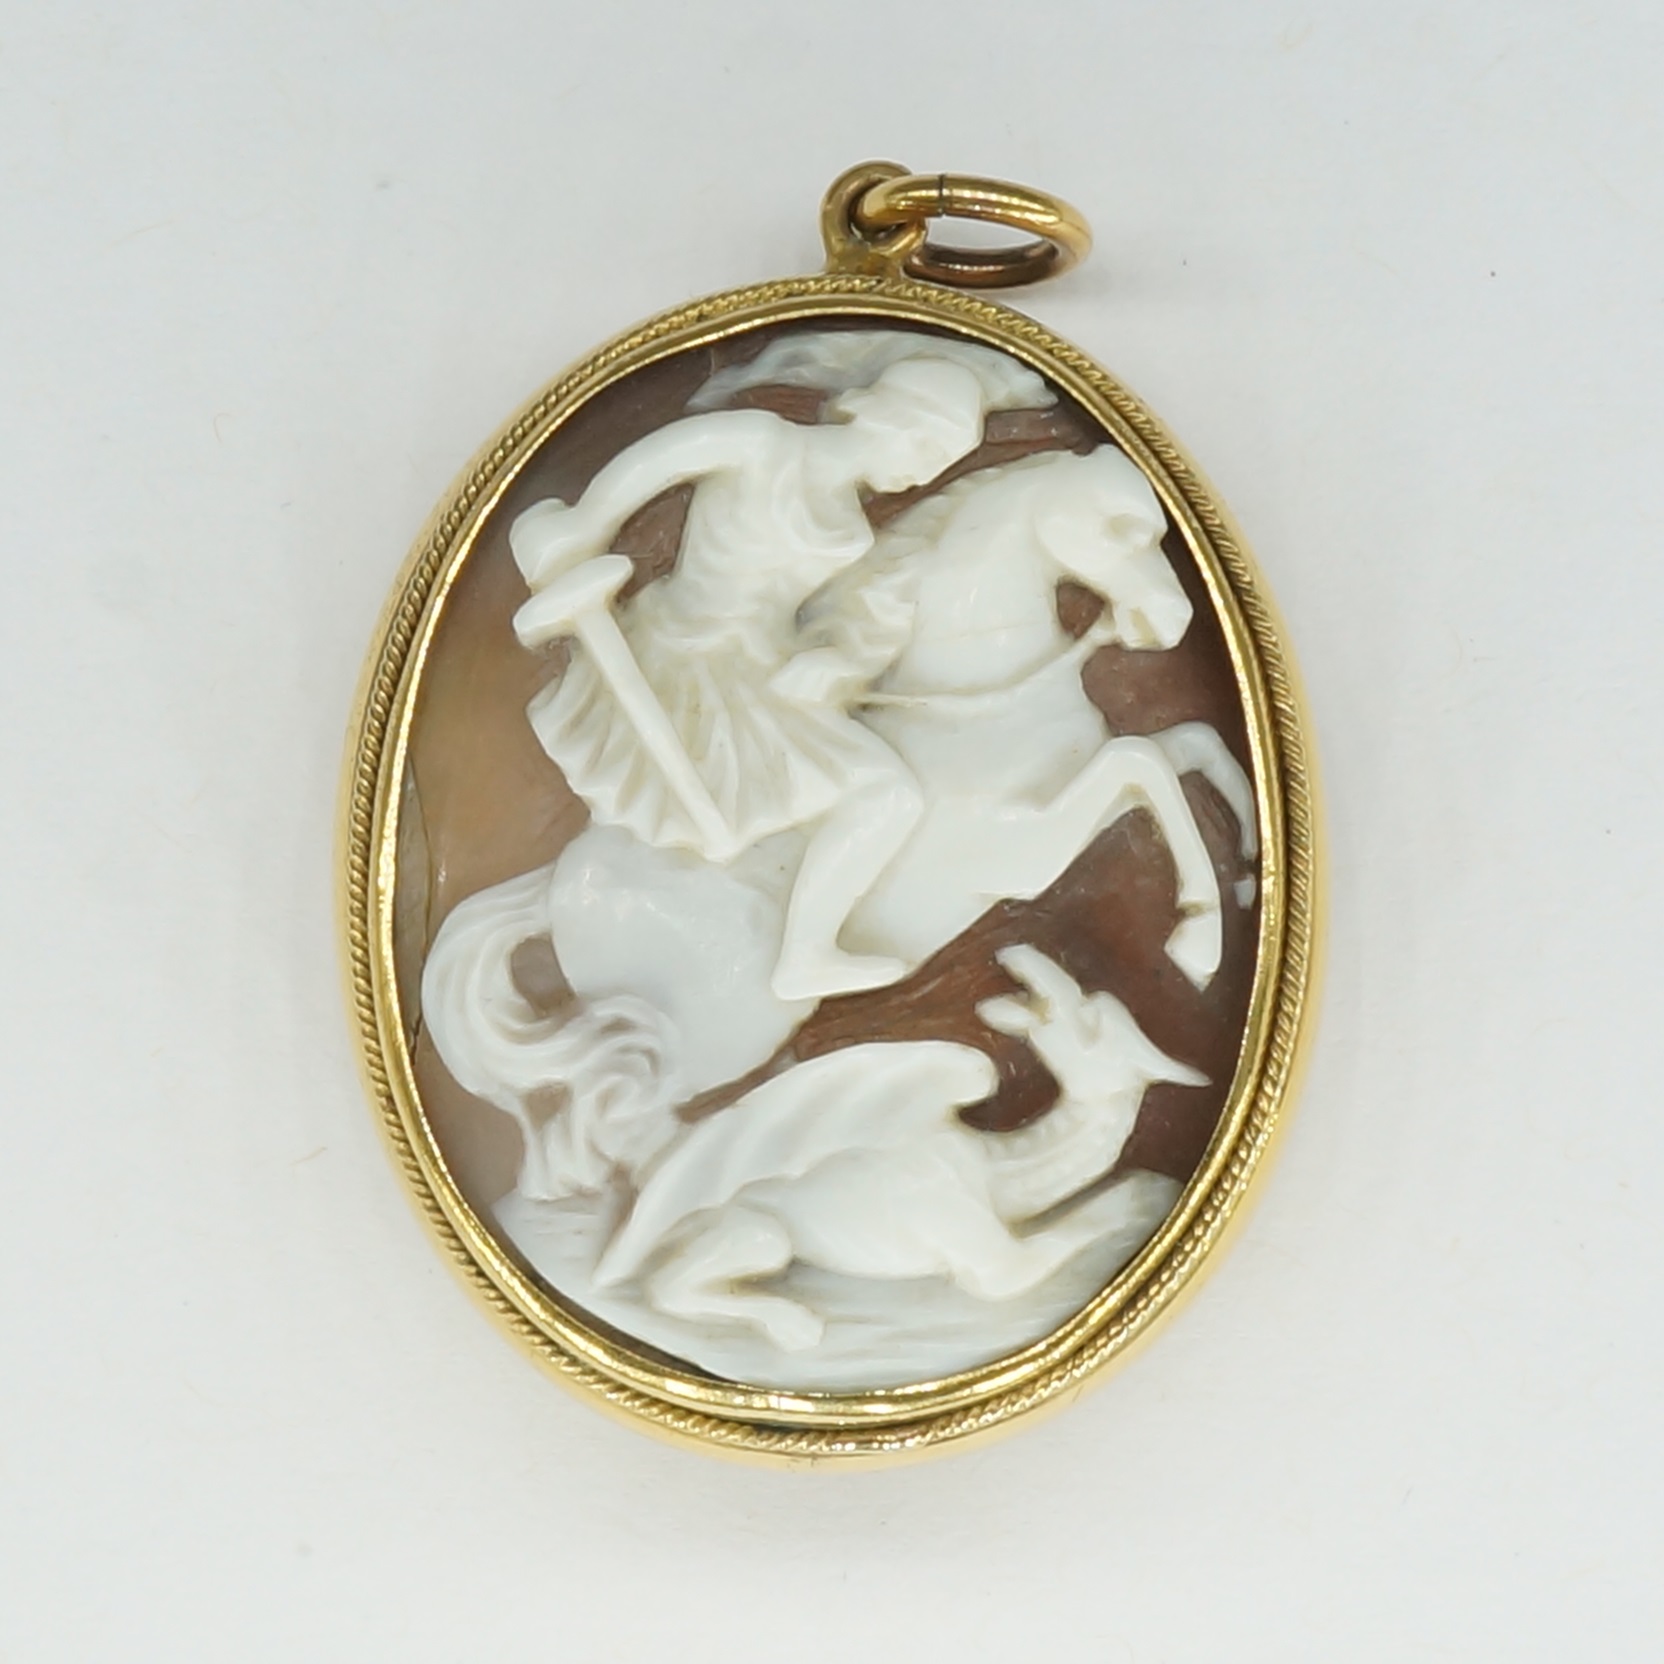 'Gold Plated and Carved Shell Cameo Pendant Depicting Saint George Slaying the Dragon'